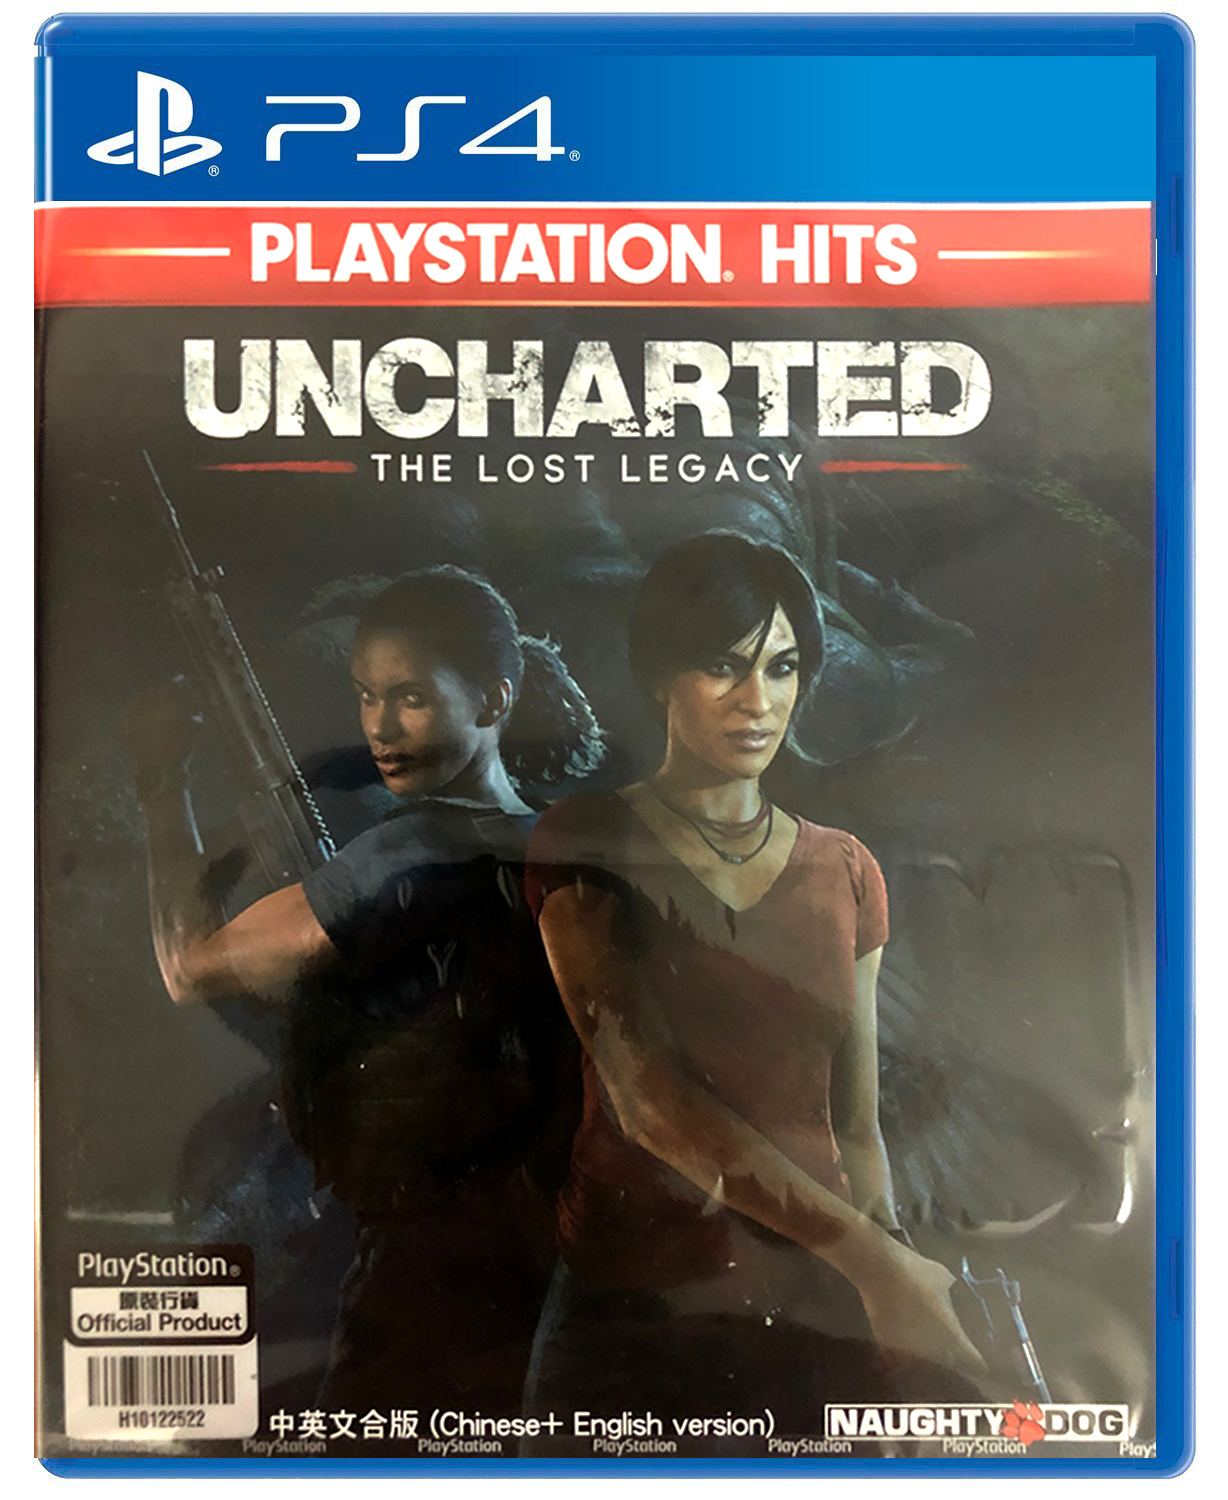  Uncharted The Lost Legacy PS4 Playstation 4 Game : Video Games